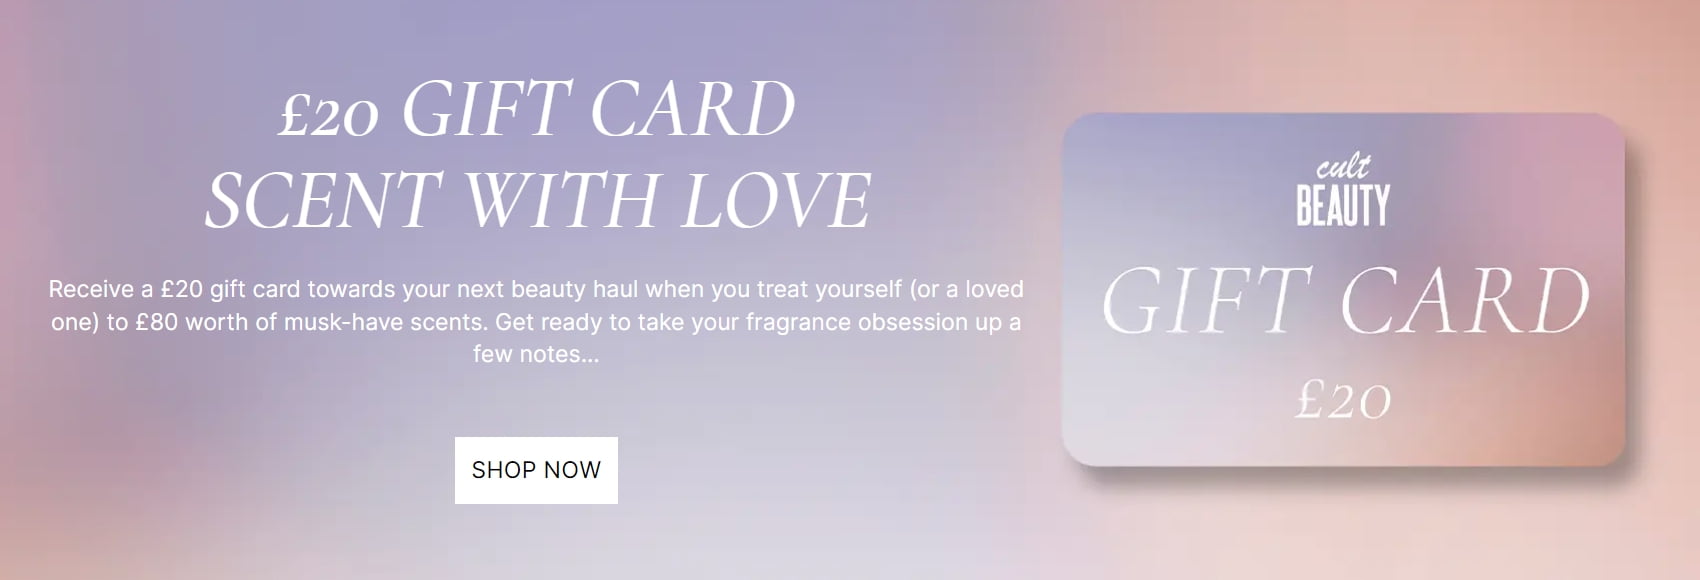 Get a £20 Gift Card towards your next beauty haul when you spend £80 on scents at Cult Beauty